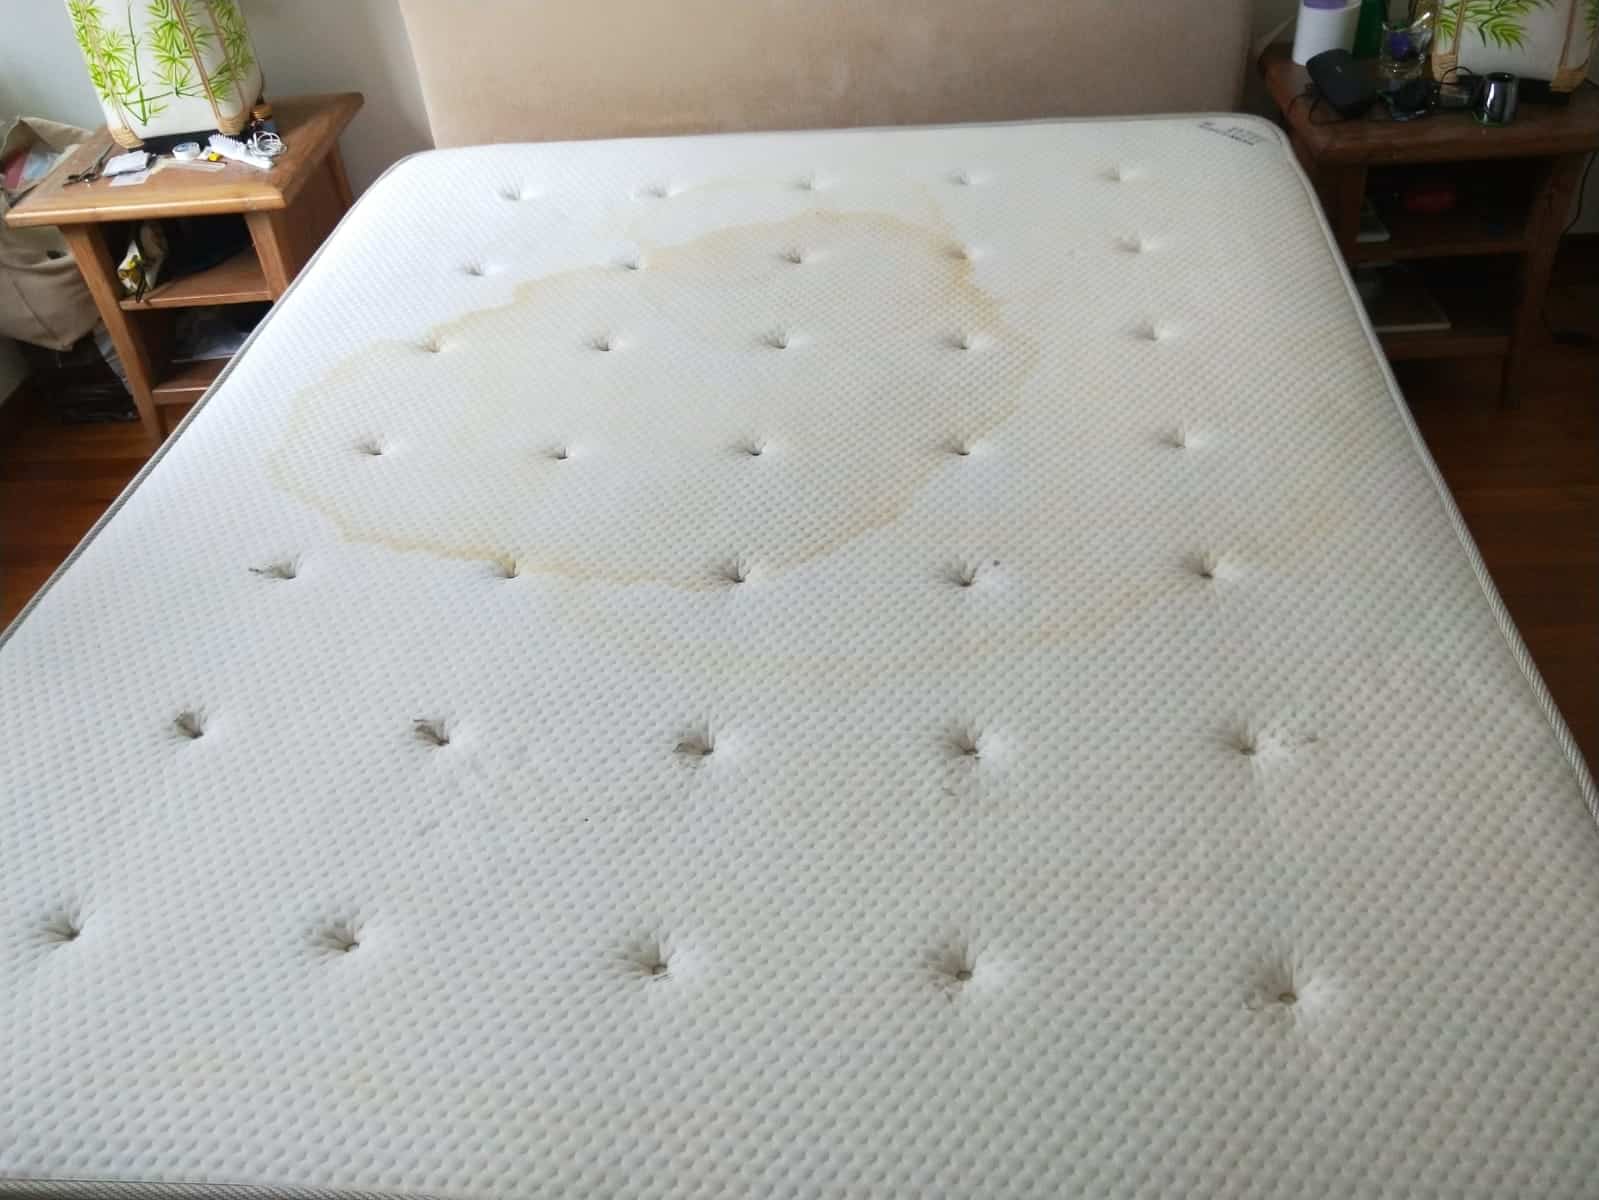 What Causes Yellow Stain On Mattress?